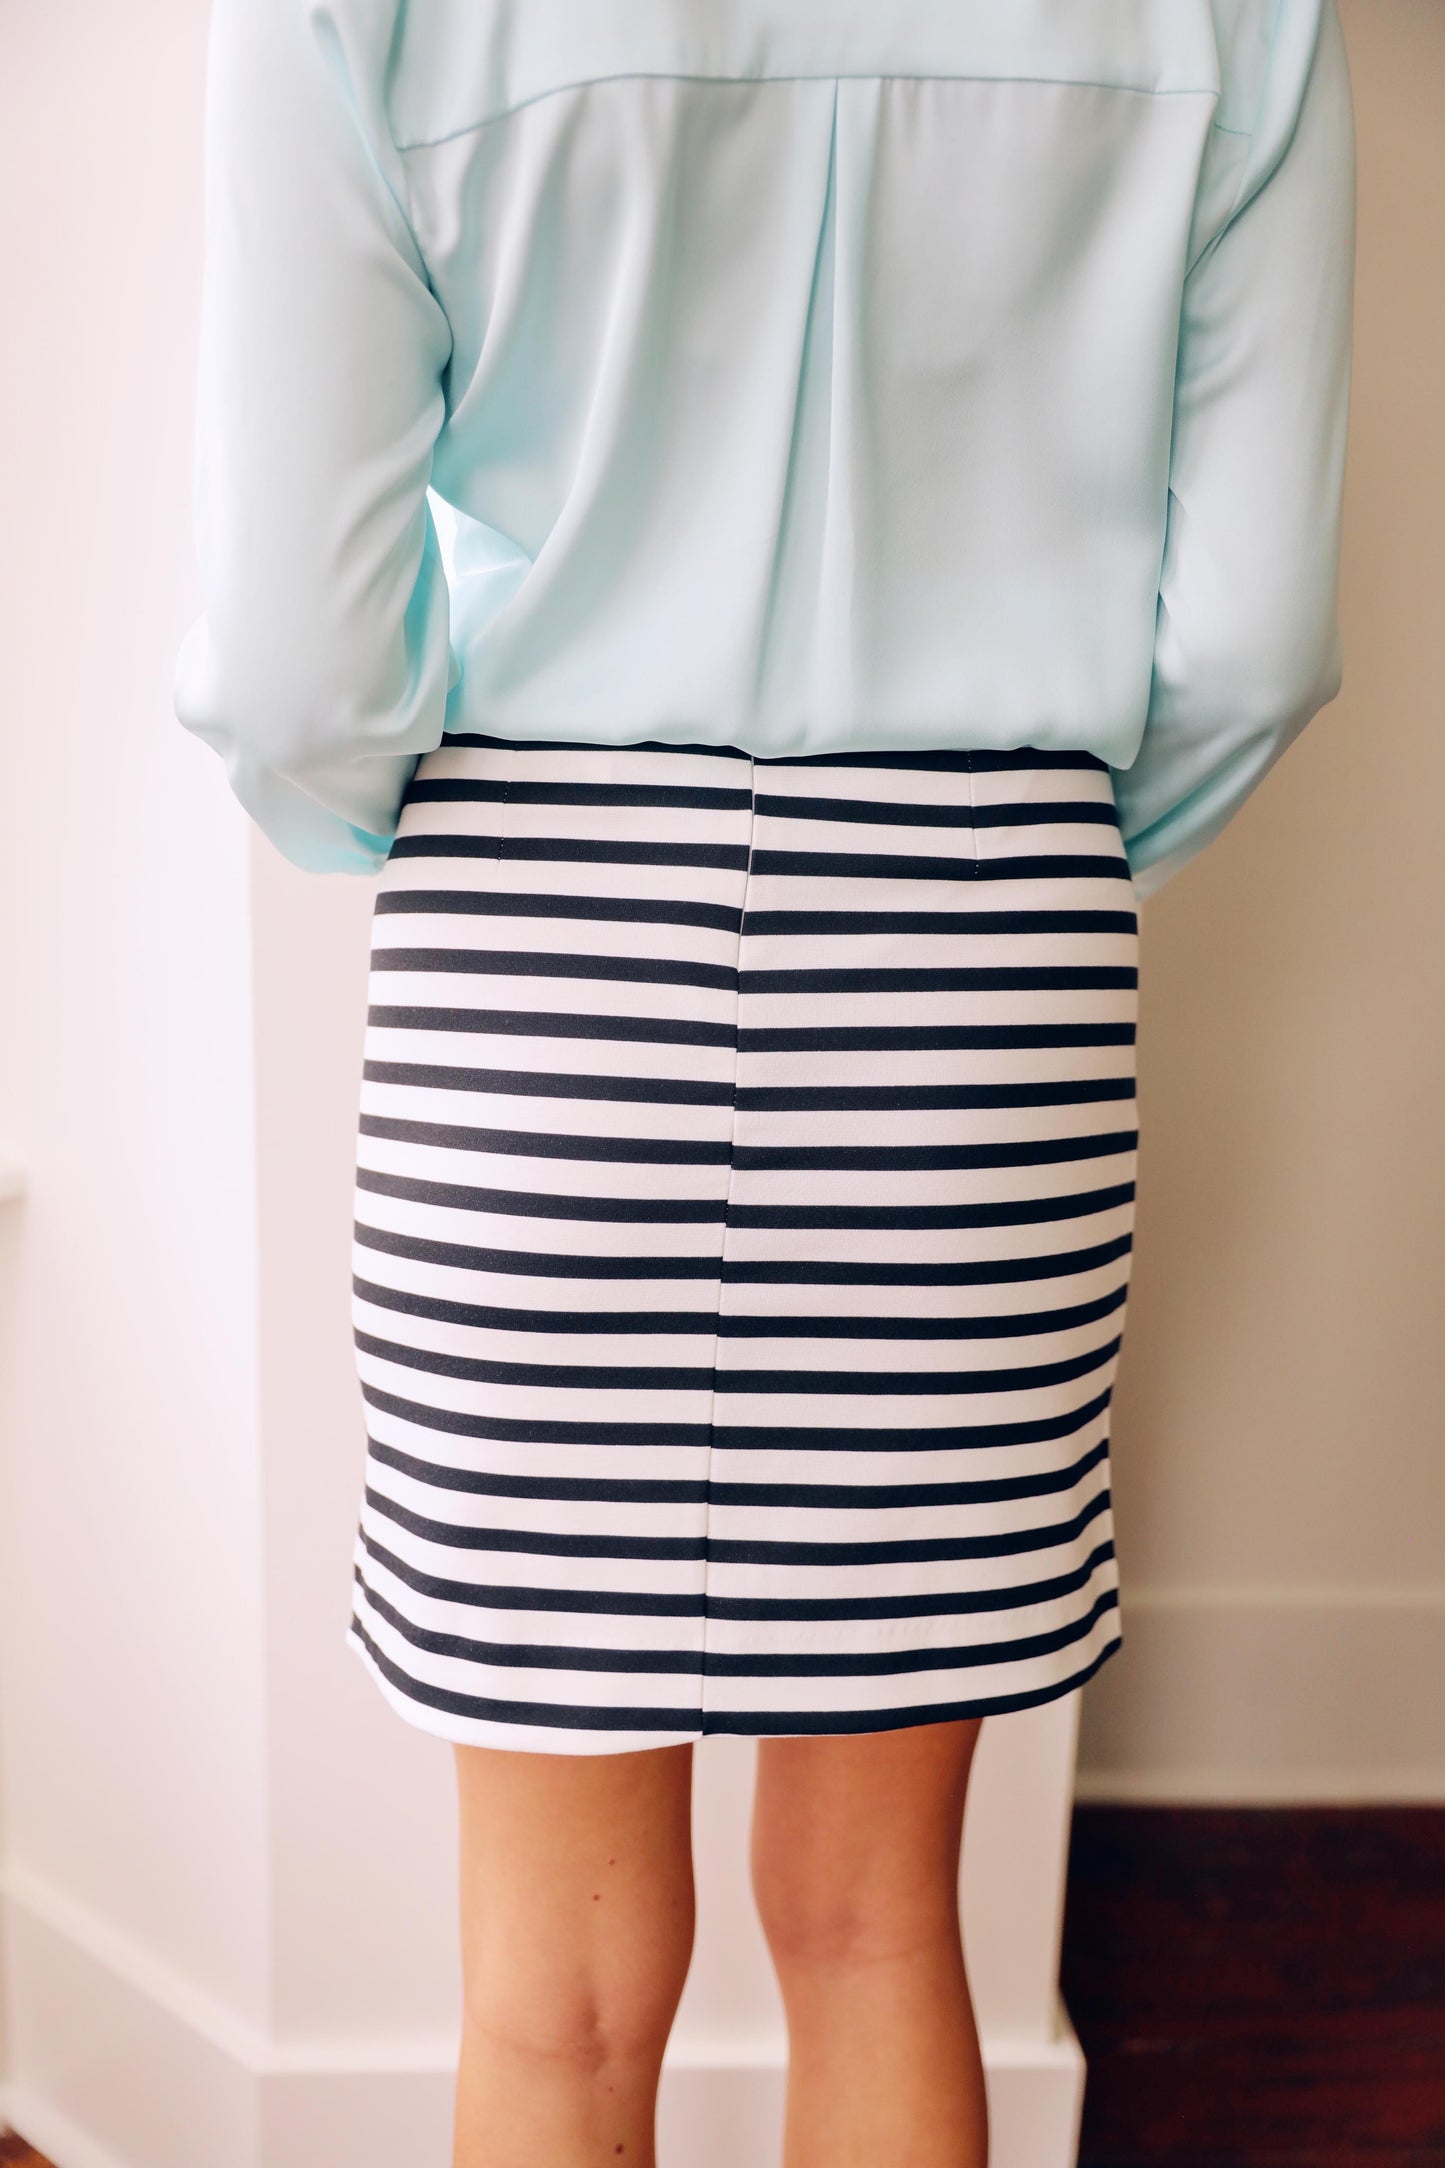 Back to Business Skirt